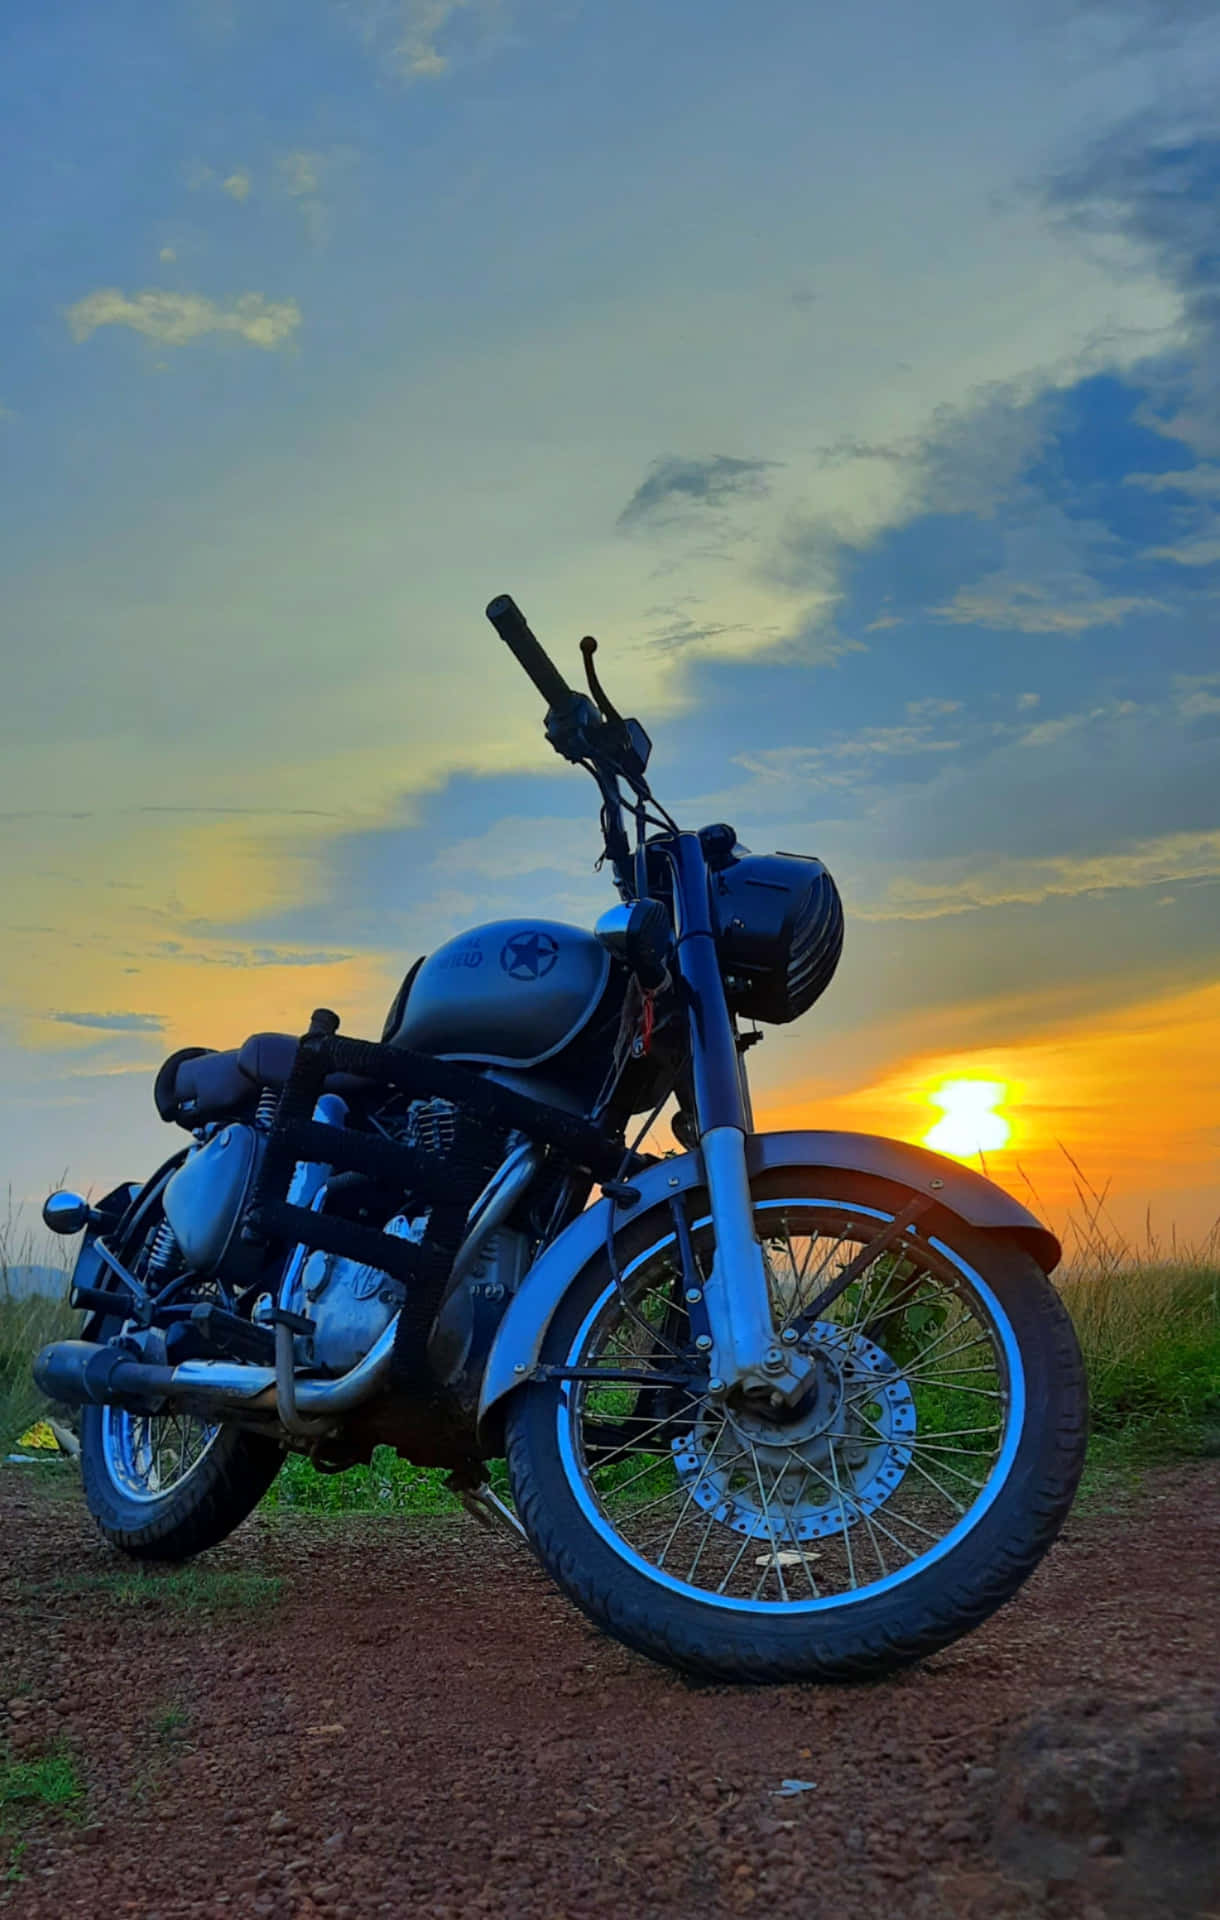 Download Royal Enfield Bullet Pictures | Wallpapers.com